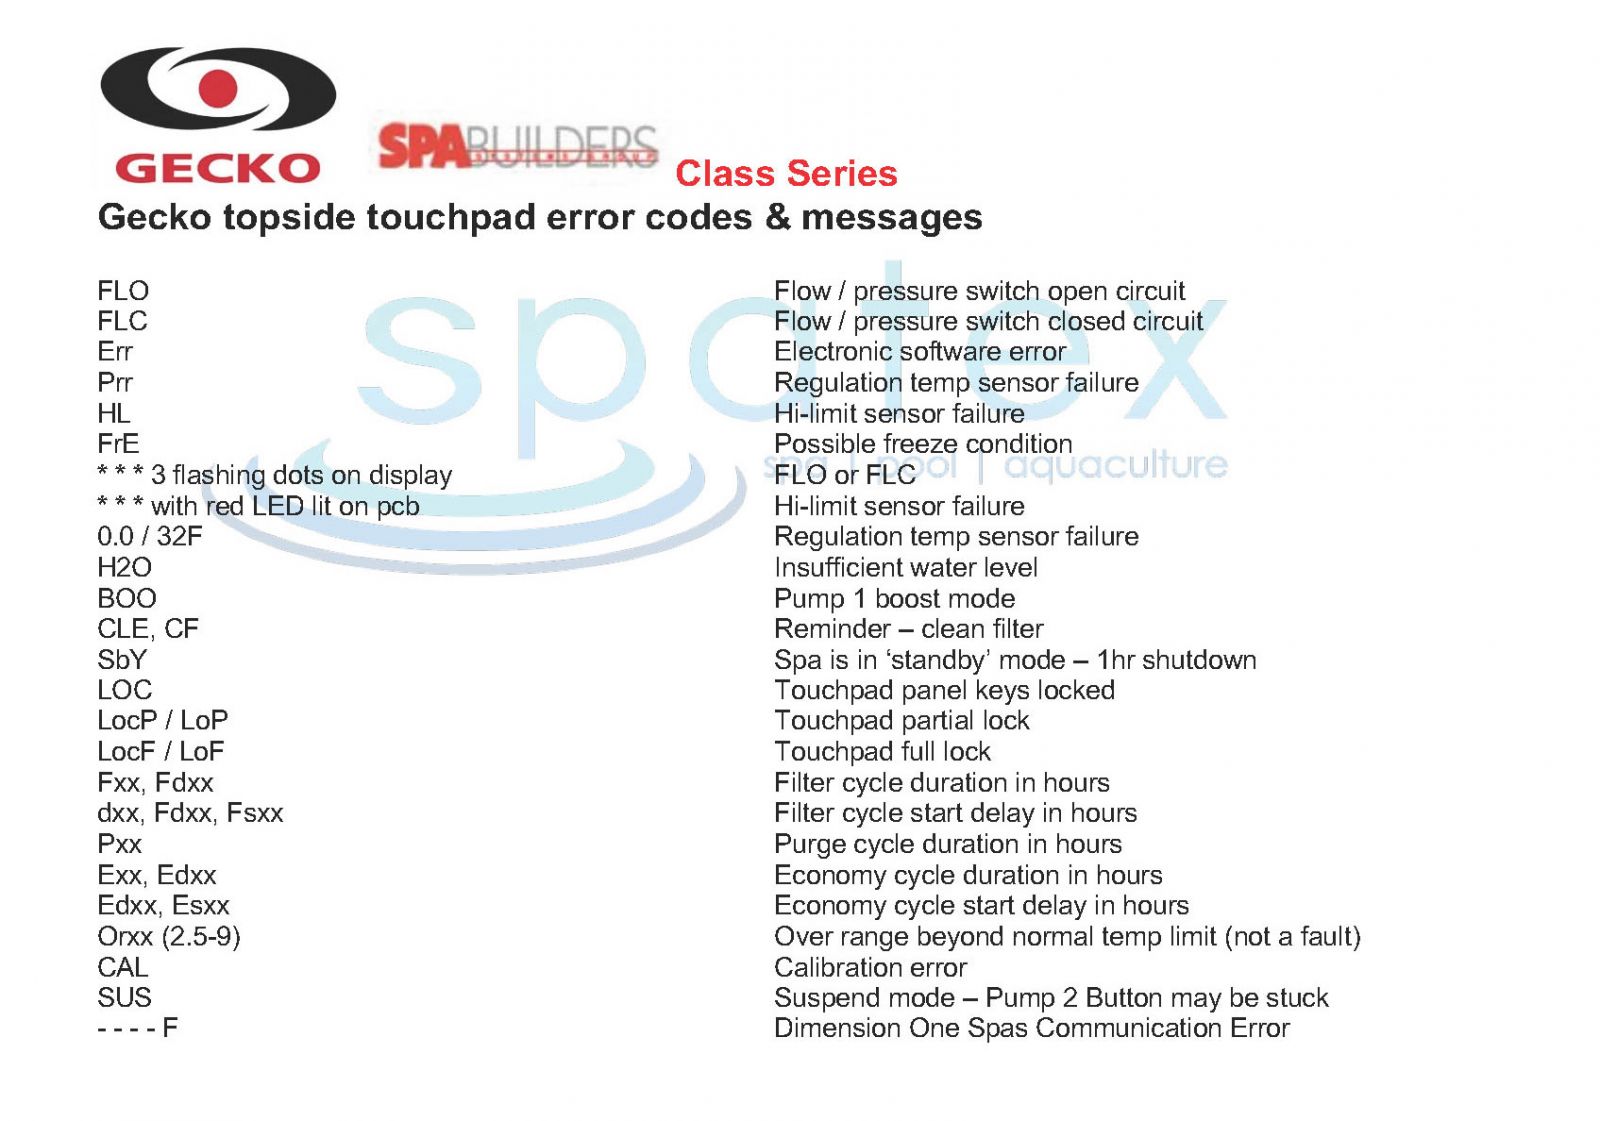 Gecko spa hot tub topside touchpad error fault codes